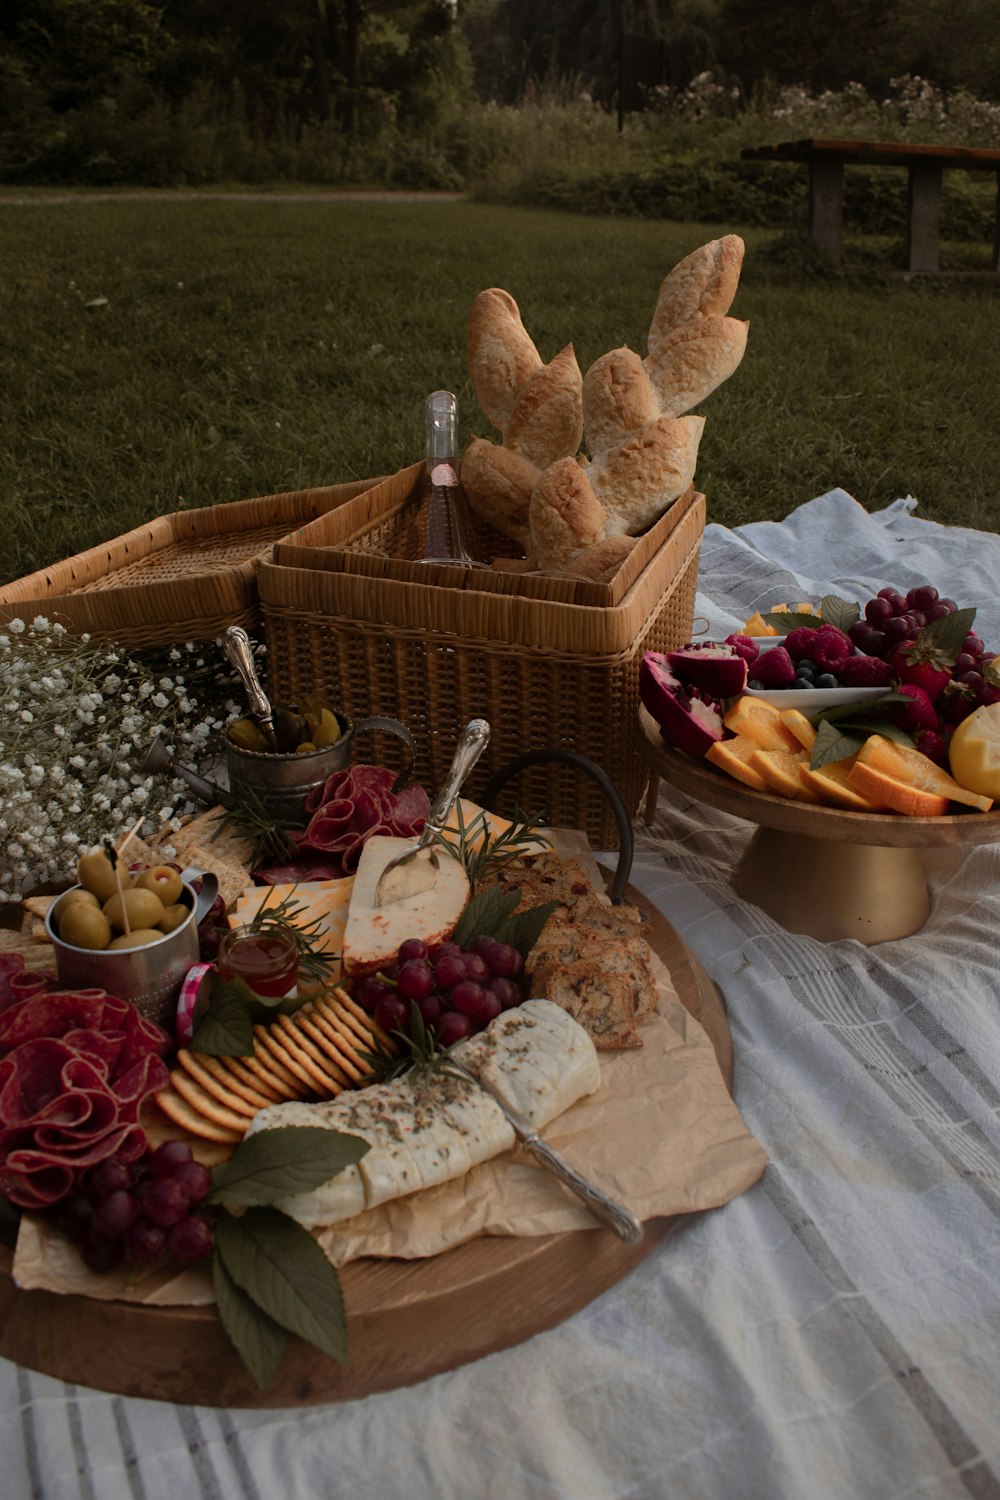 bread and sliced fruits on brown woven basket